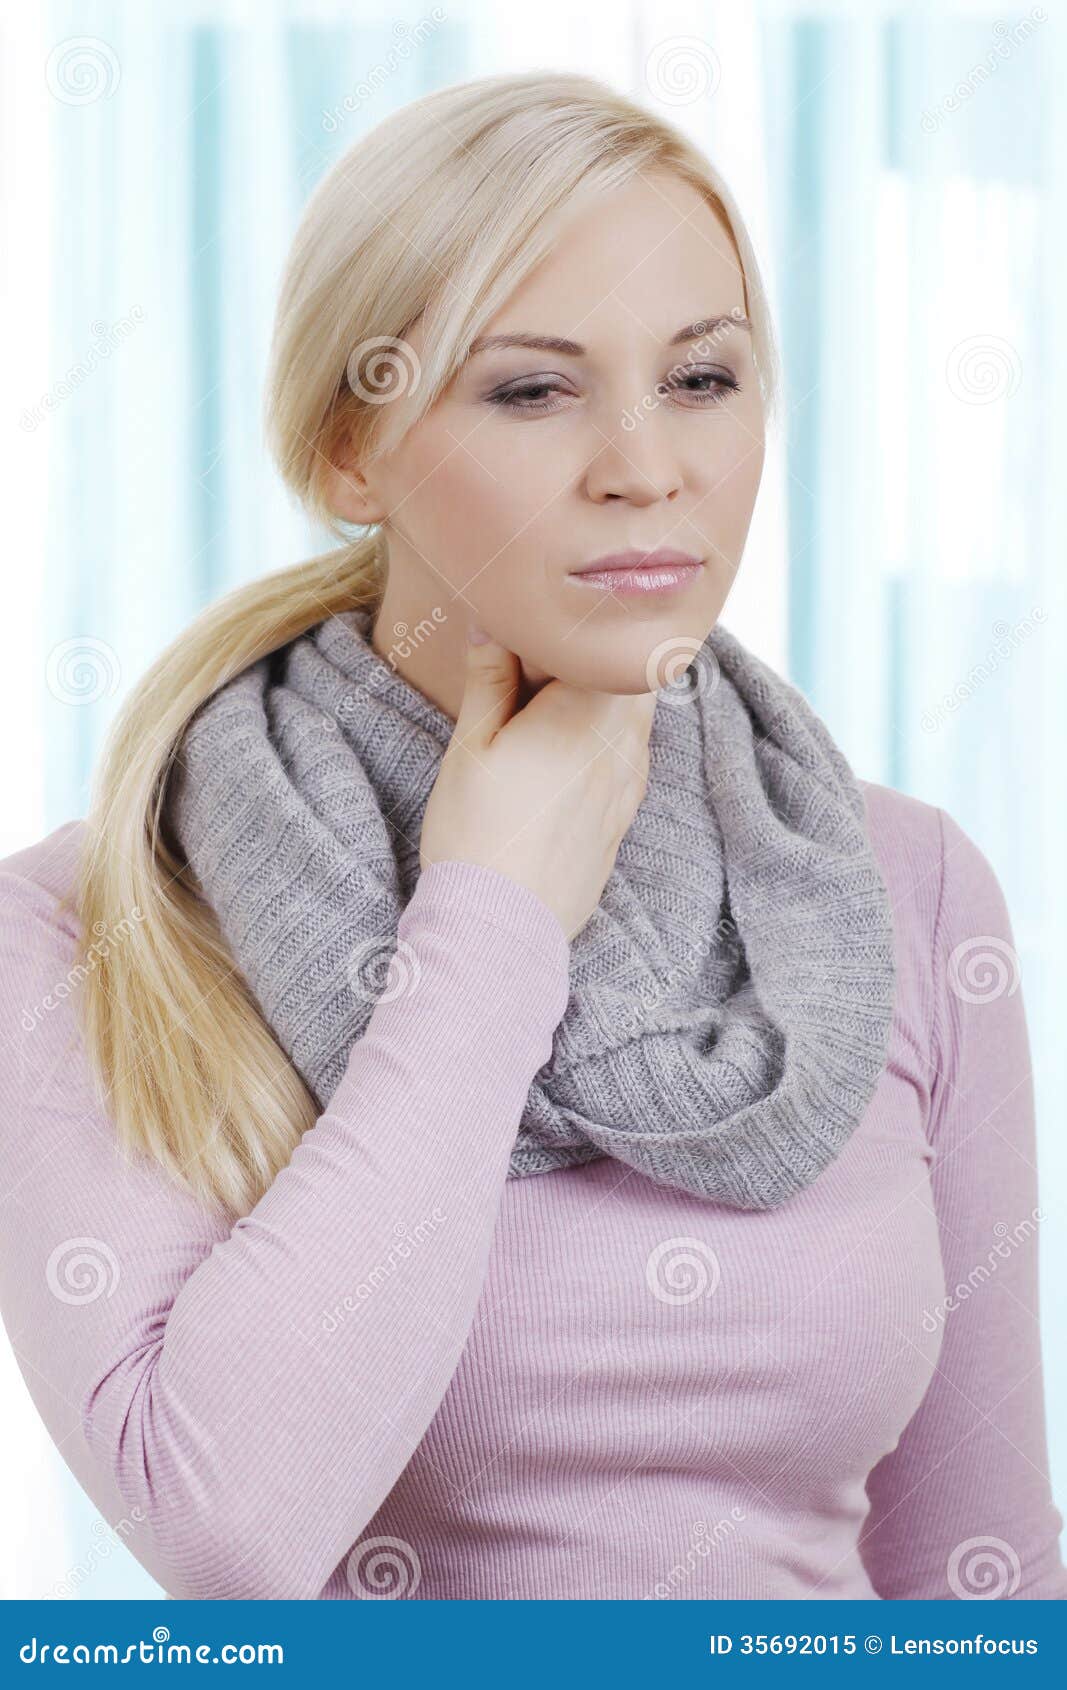 blonde woman with sore throat